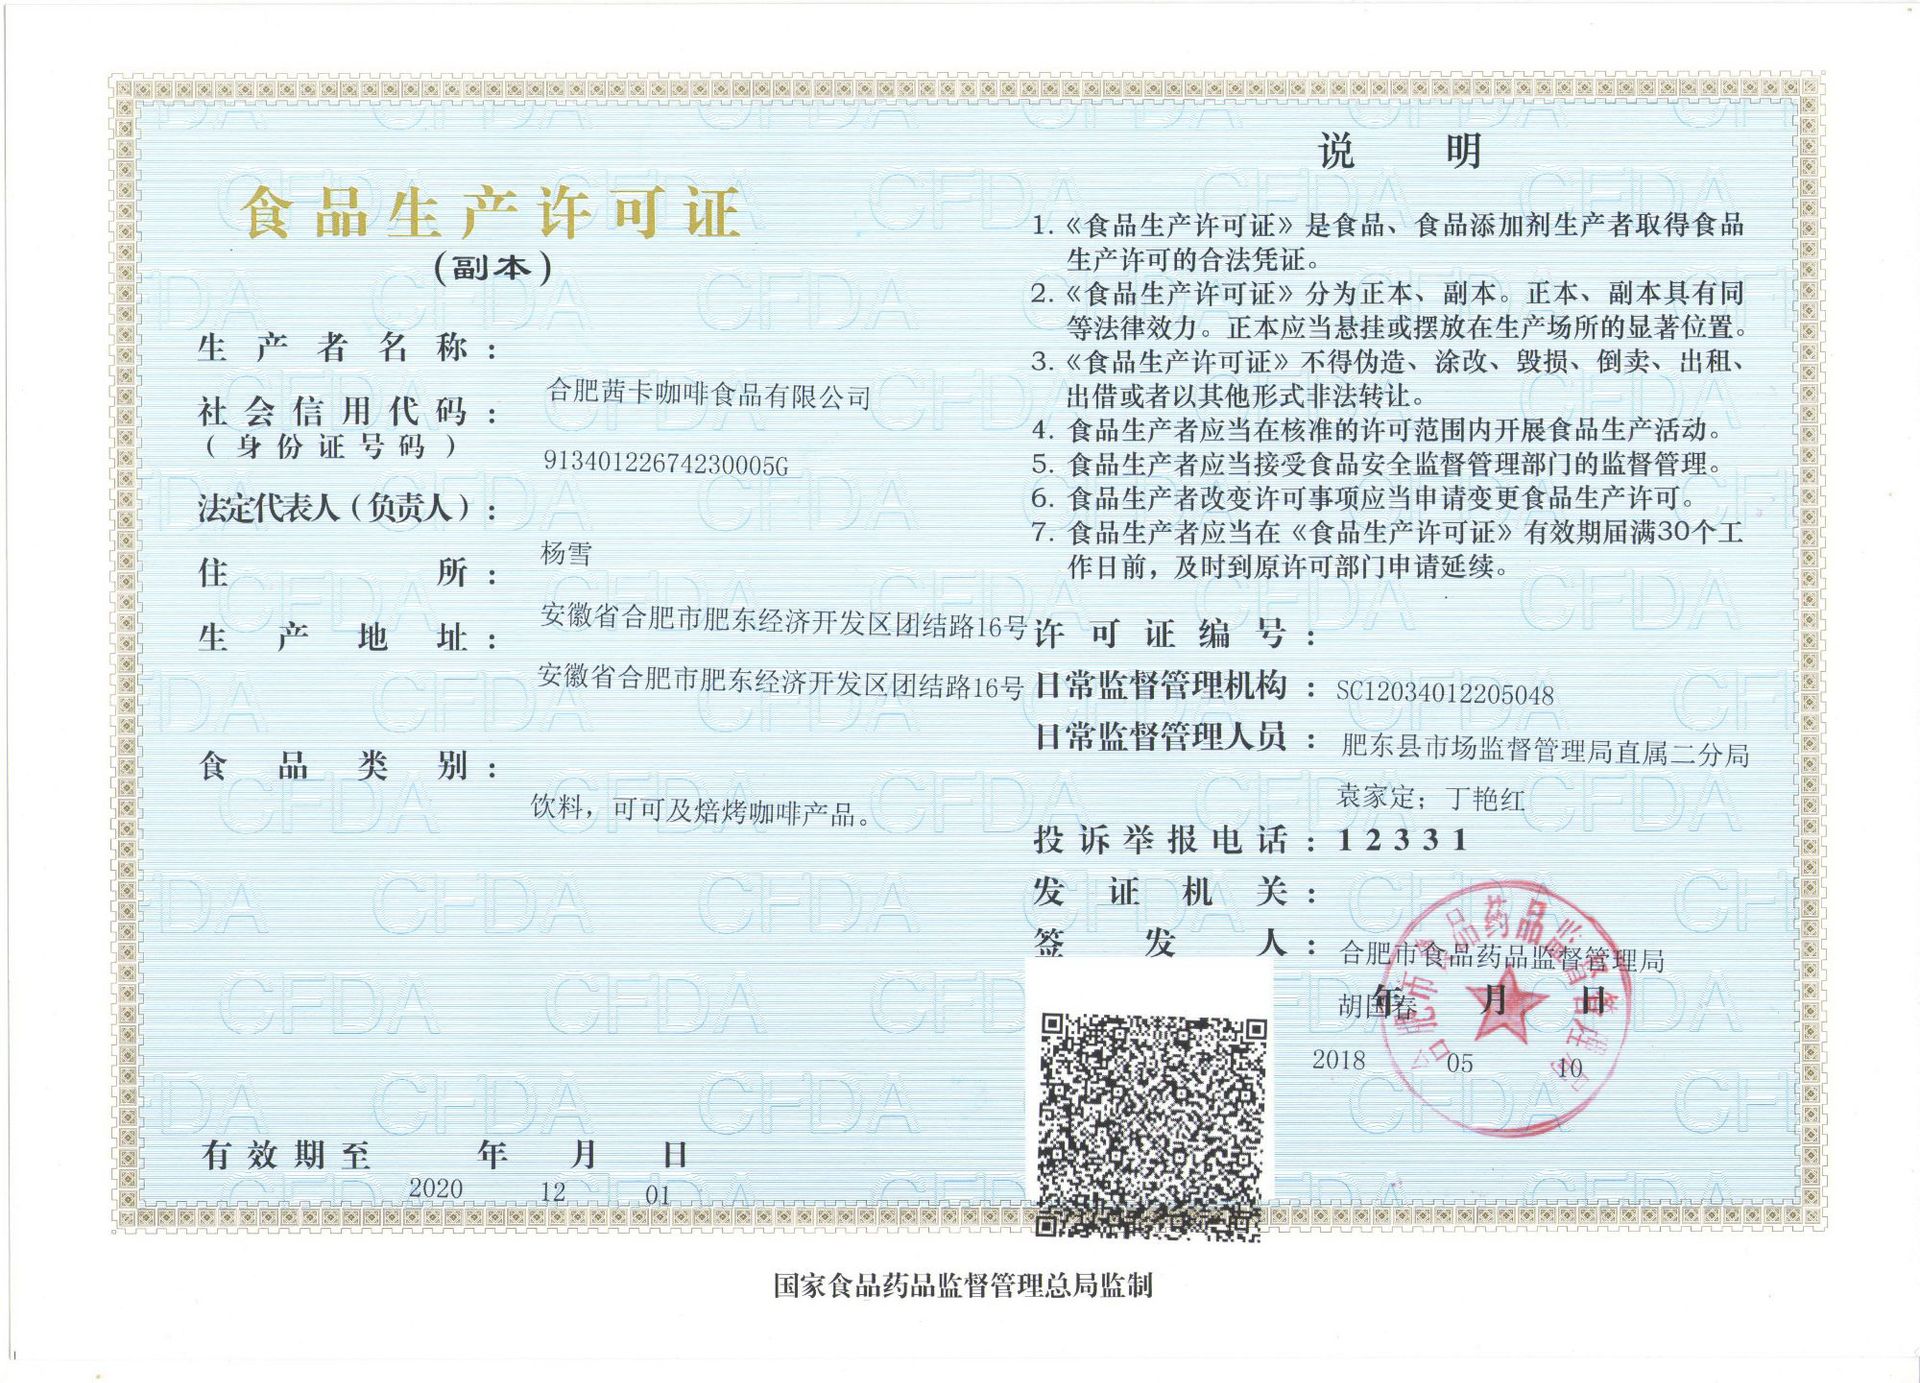 Copy of food production license